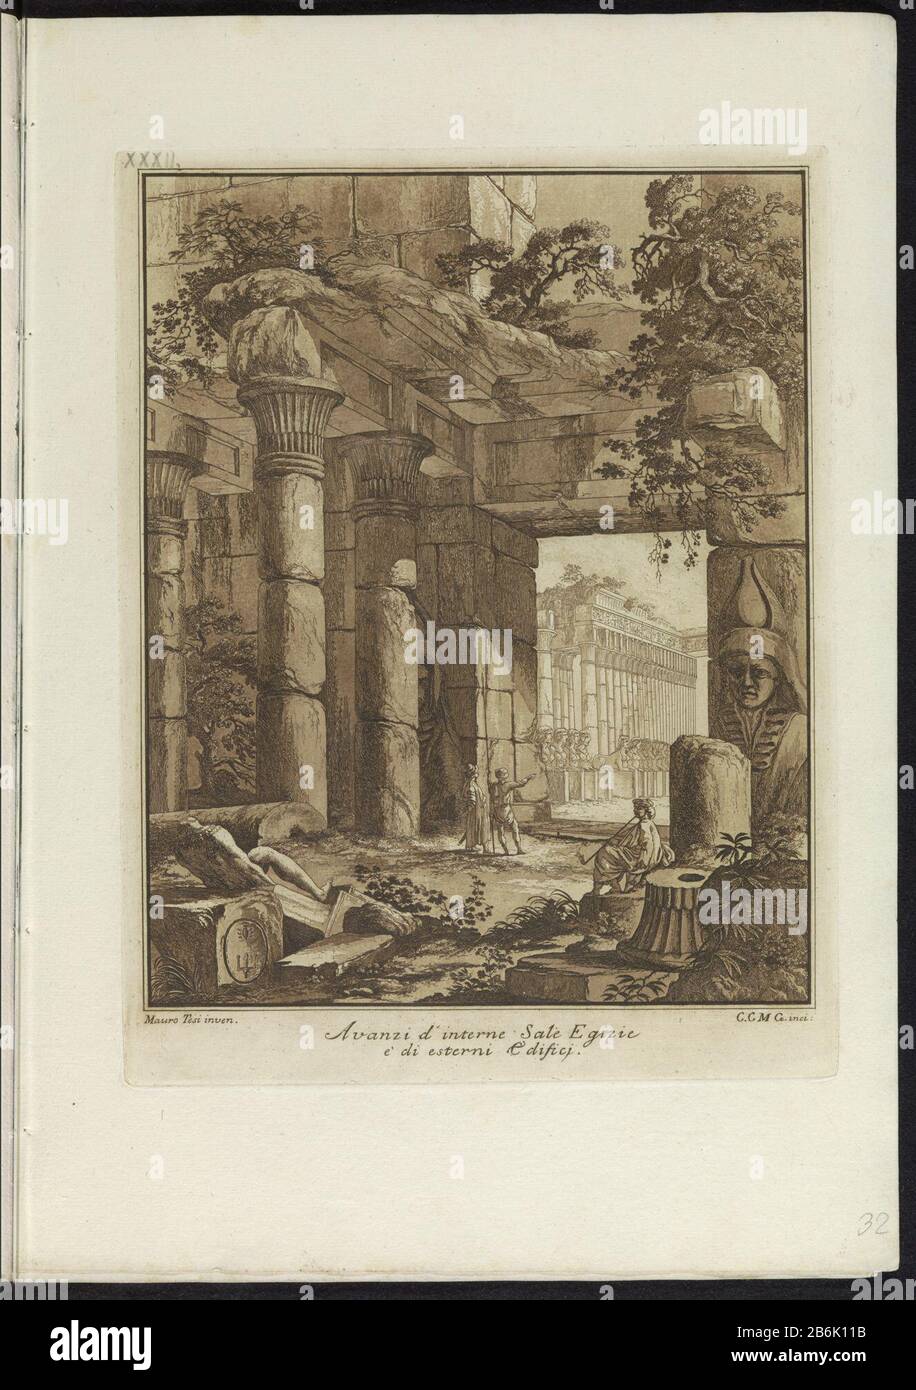 Door vegetatie overwoekerde Egyptische Architecture Collection hilarious original Mauro theses (serietitel) Print is part of a album. Manufacturer : printmaker Cesare Massimiliano Gini (indicated on object) to drawing of: Mauro Antonio Tesi (indicated on object) publisher: Lodovico InigPlaats manufacture: Bologna Date: 1787 Physical characteristics: etching and aqua tint in brown material: paper Technique: etching / aqua hue / color measurements: plate edge: h 267mm b × 180 mmblad: h 414 mm × W 289 mm Subject: Egyptian hieroglyphsruin of a building architecture  Stock Photo